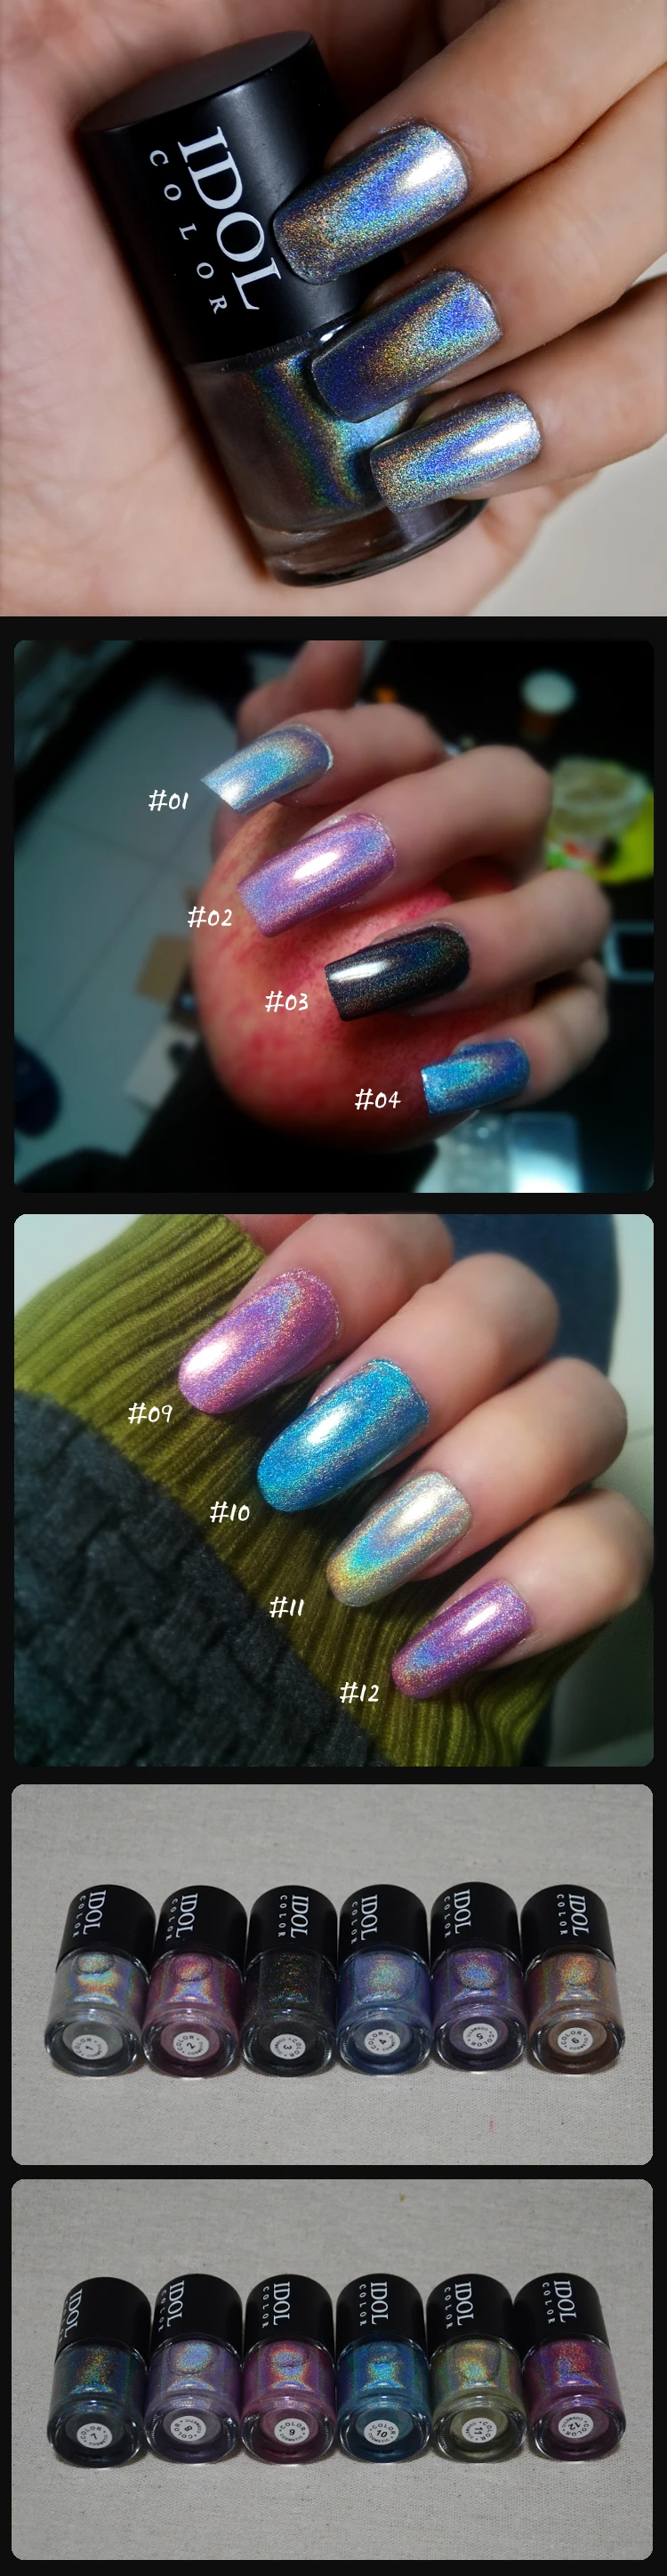 Layla Hologram comparions swatches ~ More Nail Polish